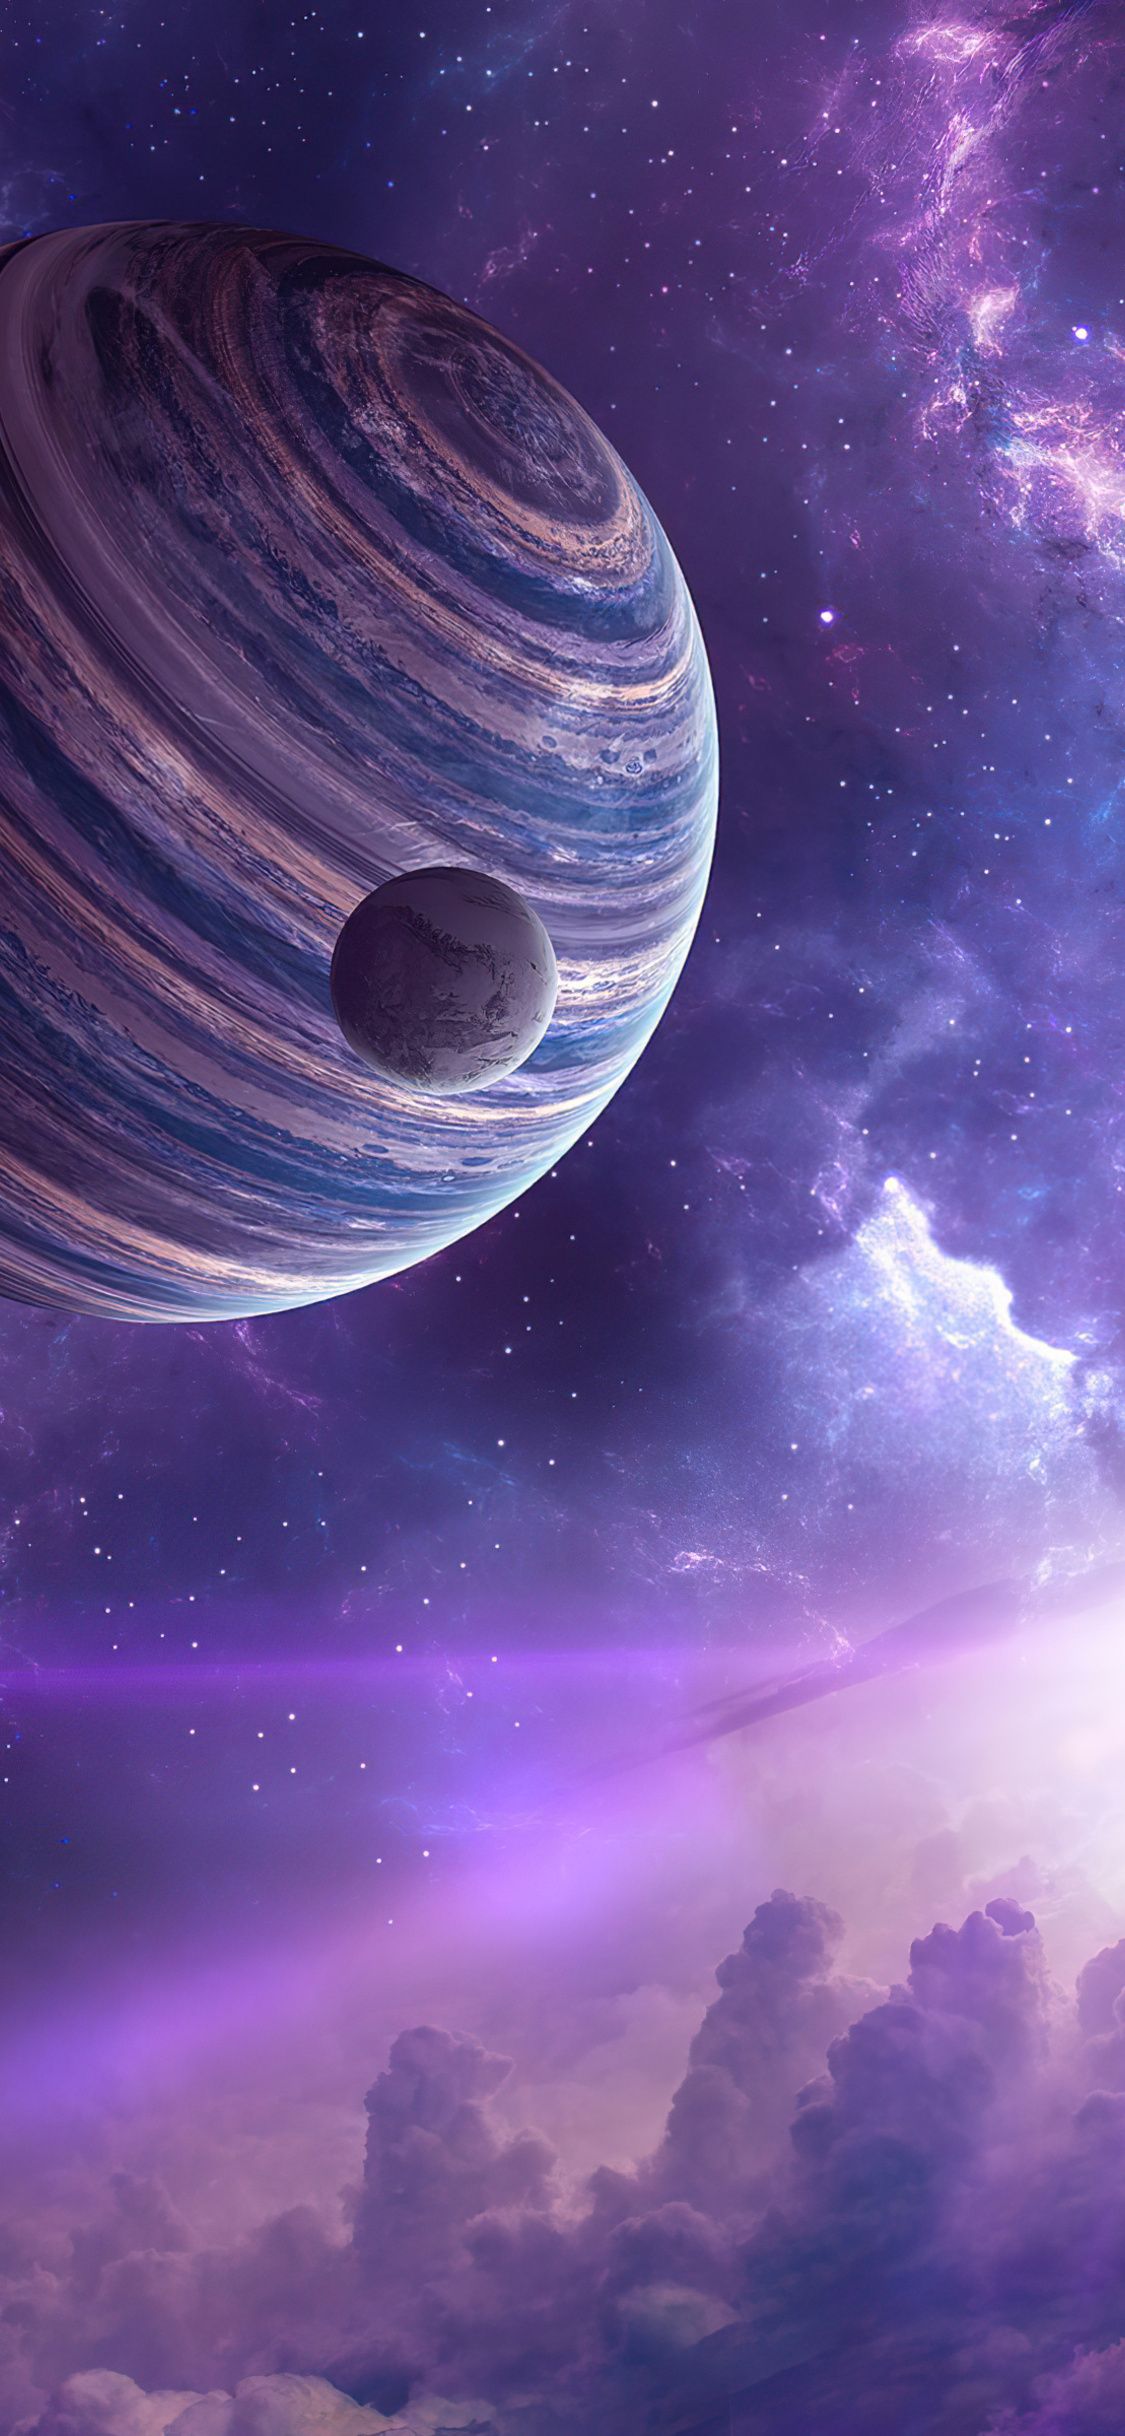 Planets 1920x1080  rwallpapers  Planets wallpaper Space art  Wallpaper space